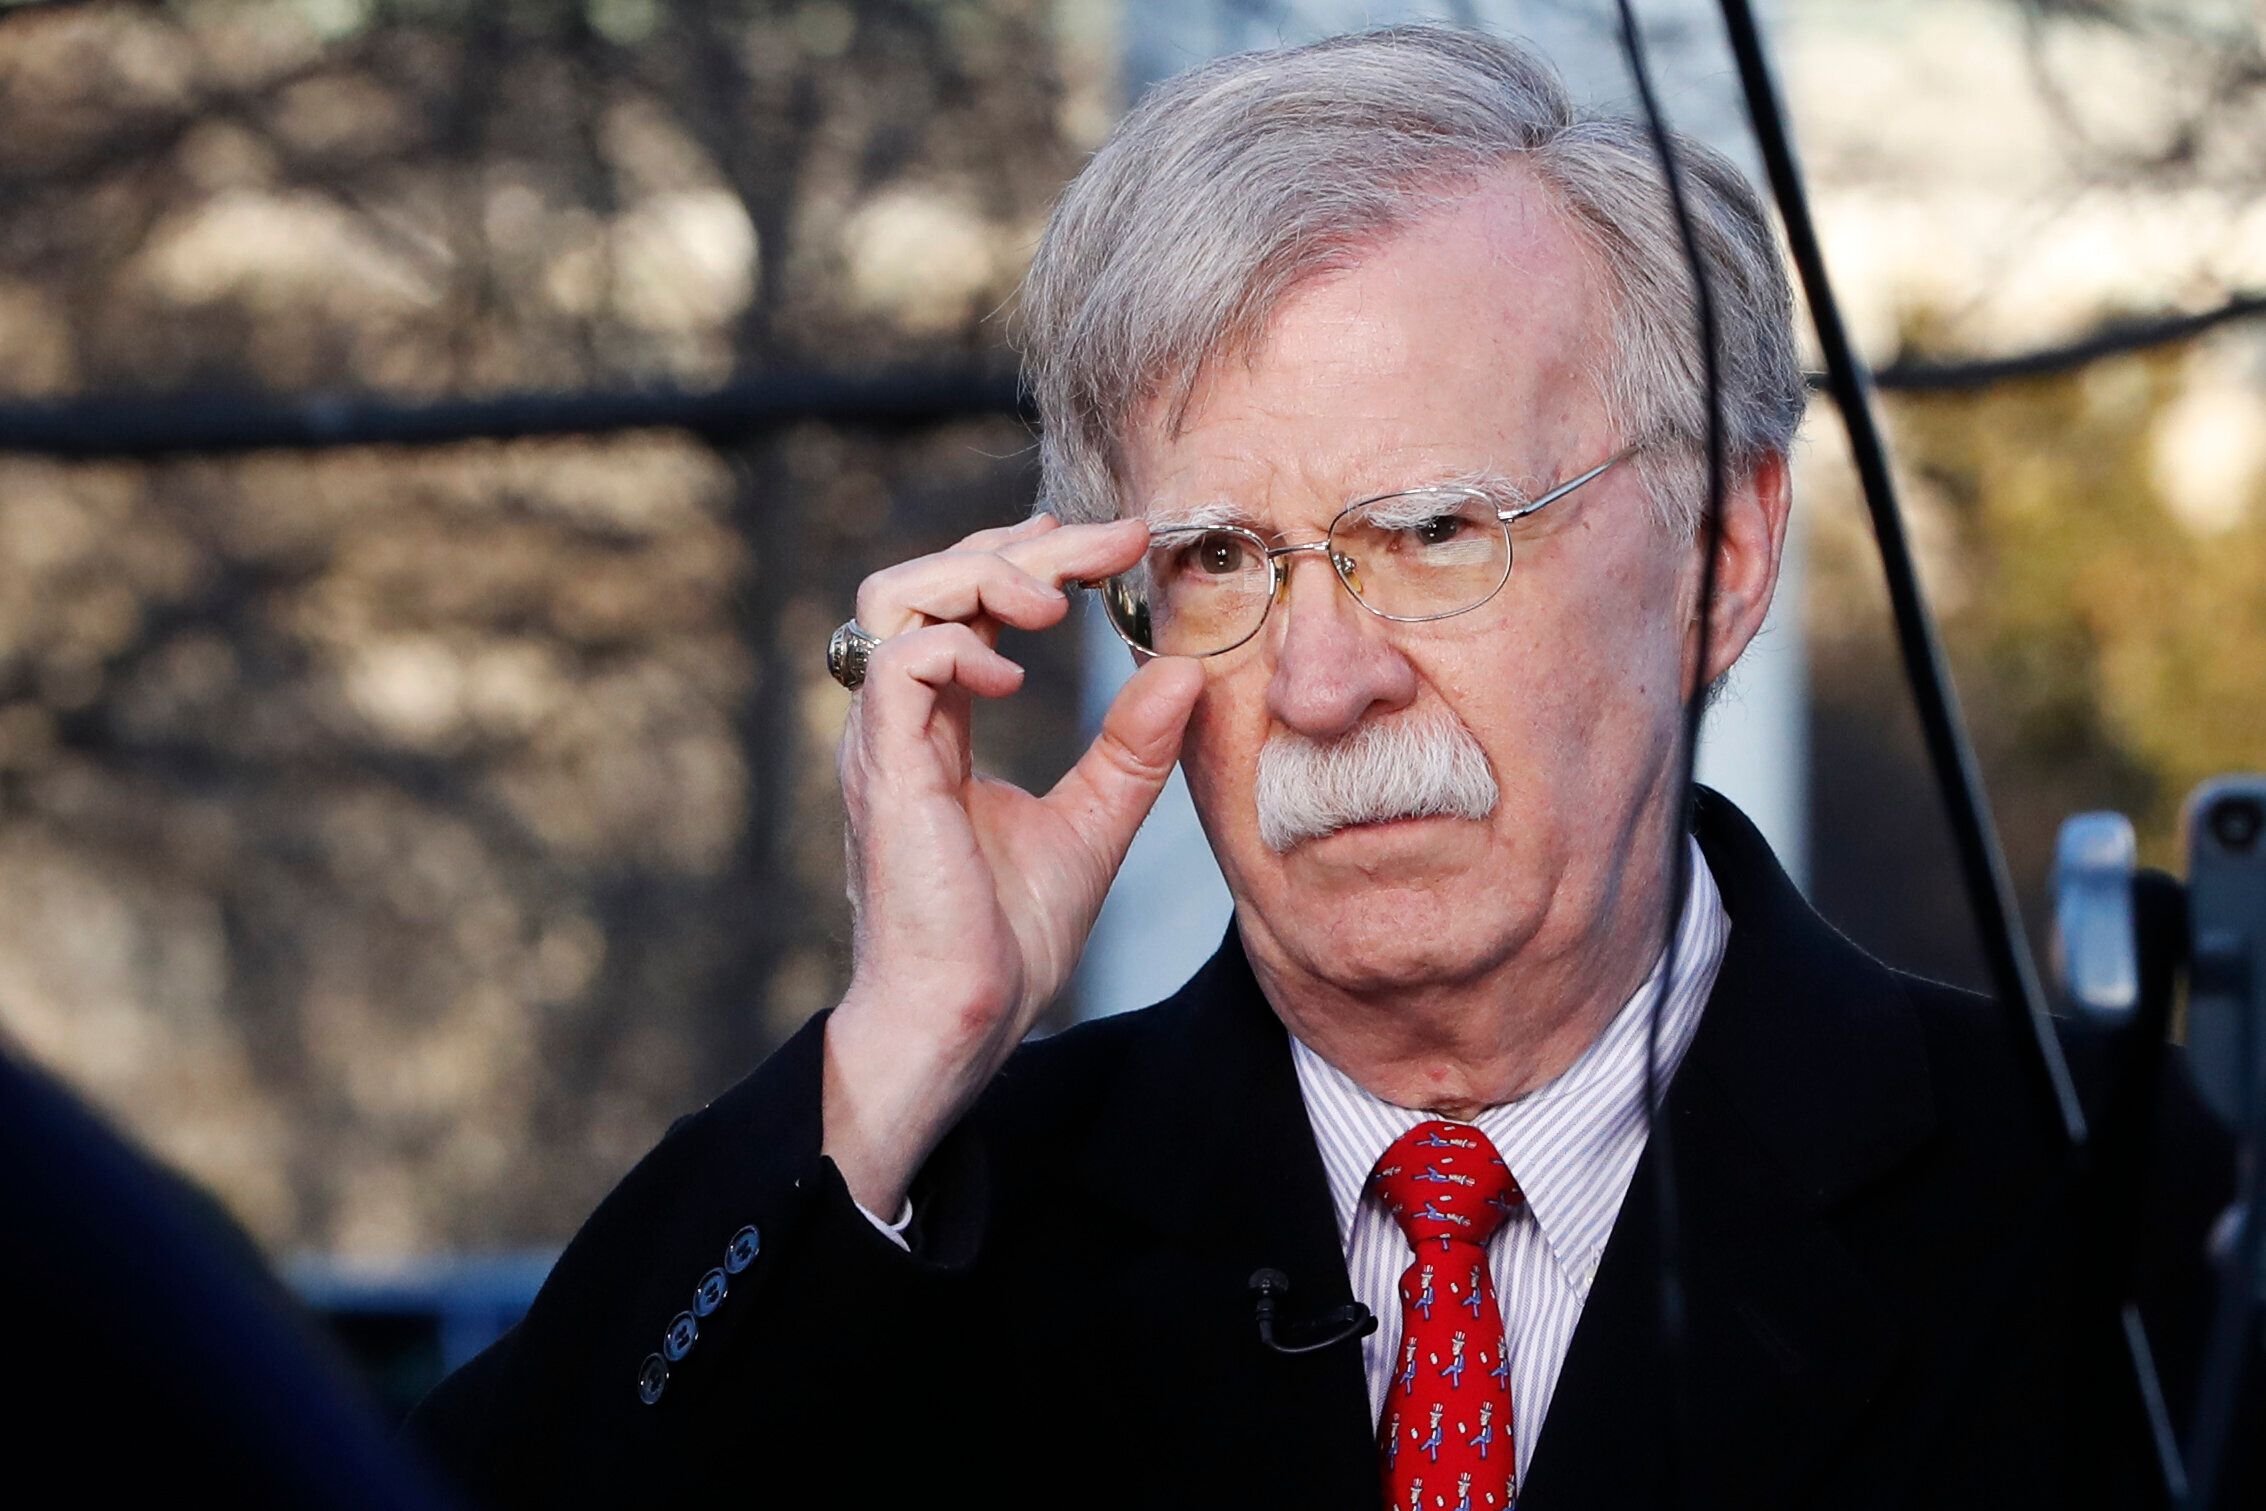 John Bolton, the former national security adviser Reportedly Raised Alarm About Trump Granting Favors To China, Turkey Leaders